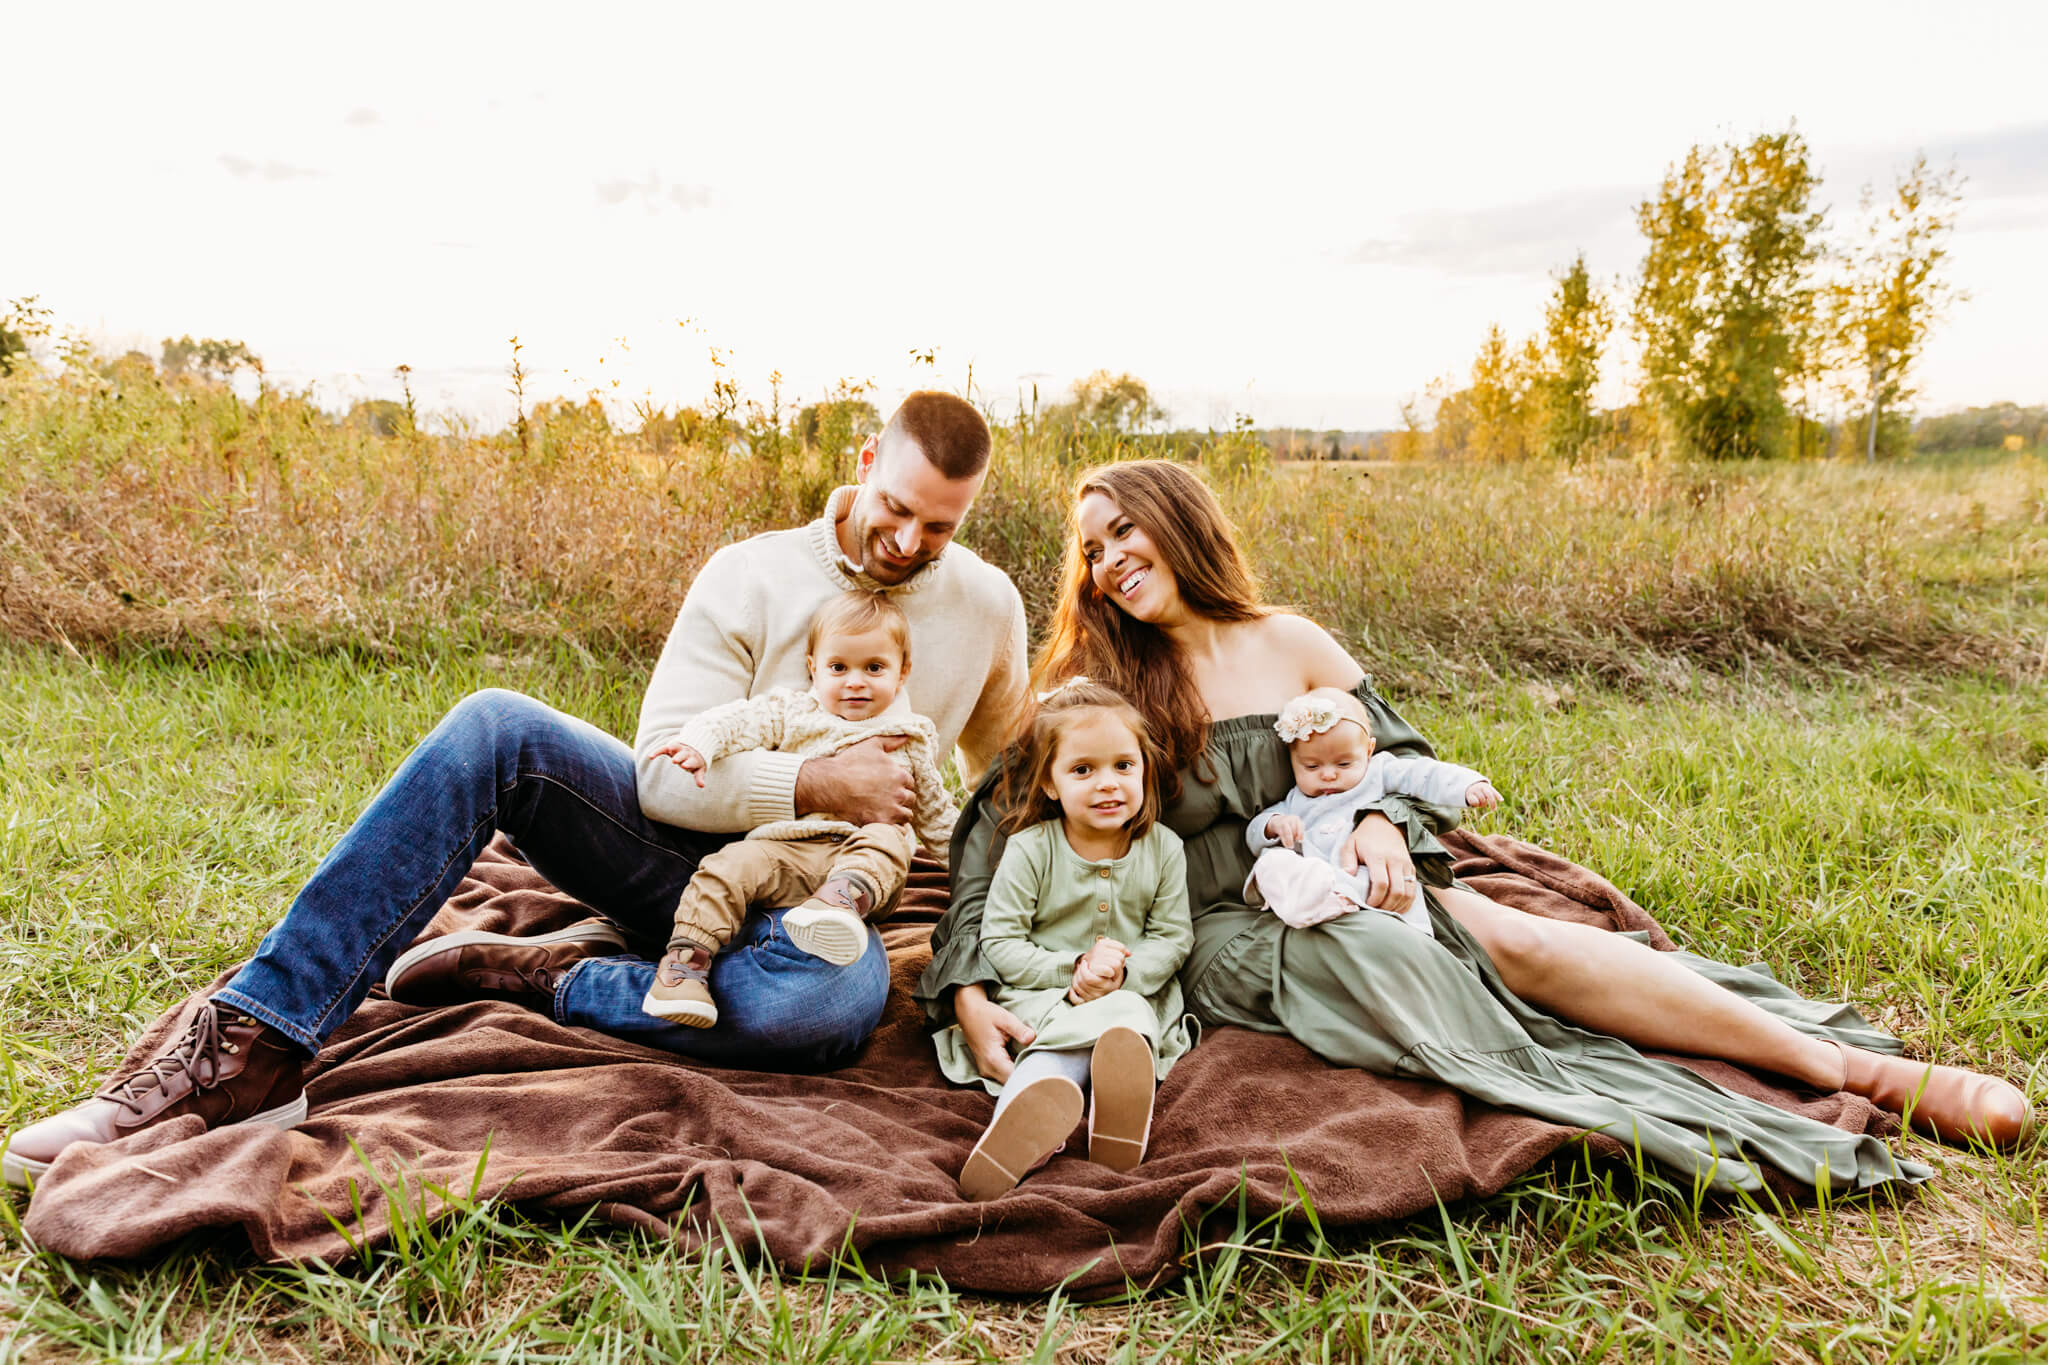 family of 5 snuggling in a field at sunset near Green bay WI